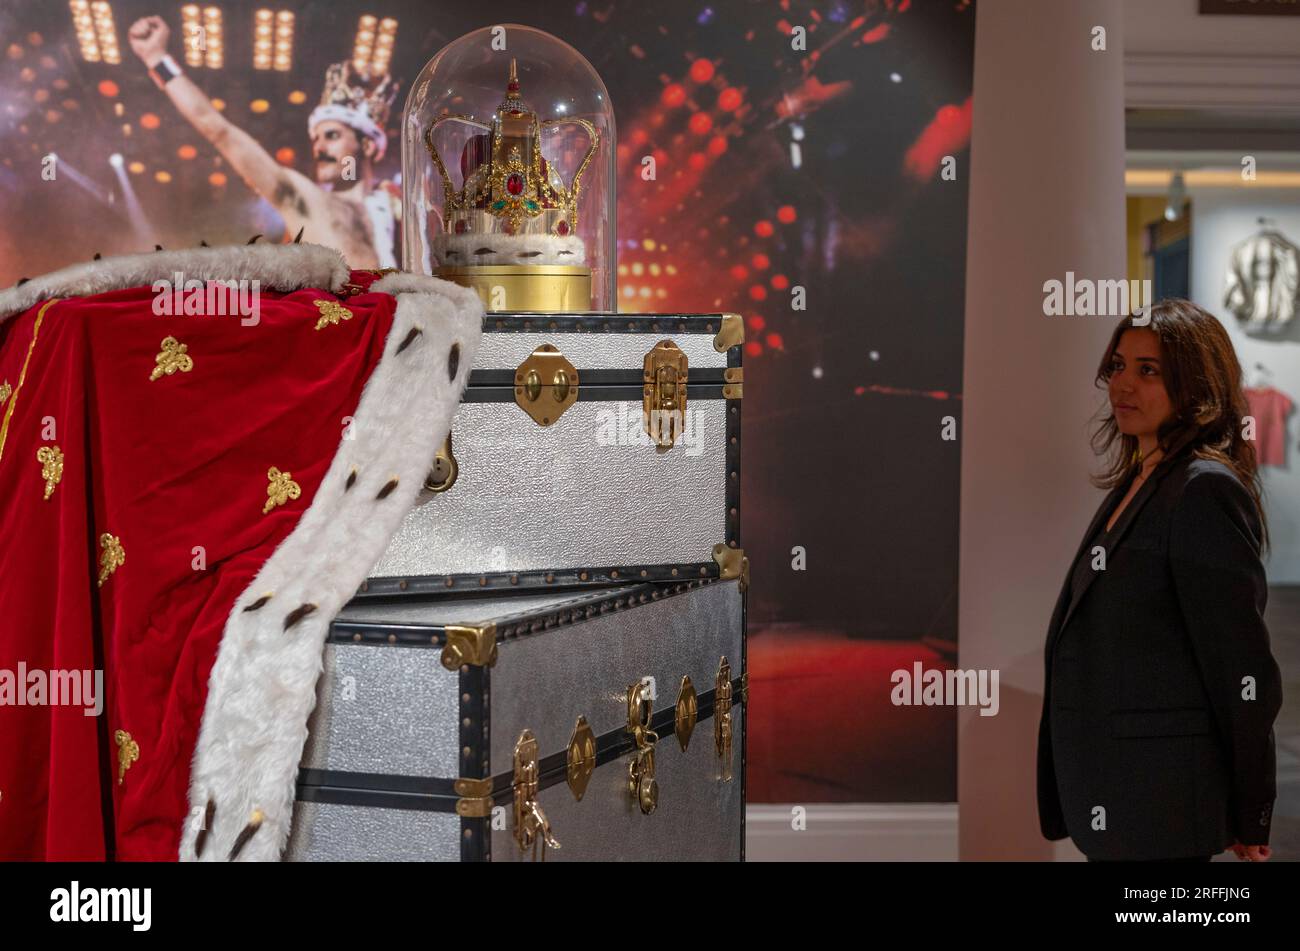 Sotheby's, London, UK. 3 August 2023. An exhibition of the contents of Freddie Mercury's London home filling Sotheby's London Galleries, on view 4 Aug-5 Sept ahead of six dedicated auctions at Sotheby's, London, in September. Image: Freddie Mercury's crown and accompanying cloak, in fake fur, red velvet and rhinestones, made by his friend and costume designer Diana Moseley, thought to be loosely modelled on the coronation crown of the United Kingdom. Indelibly linked to Mercury, they were worn for the finale rendition of “God Save The Queen” during his last tour with Queen, ‘The Magic Tour', w Stock Photo